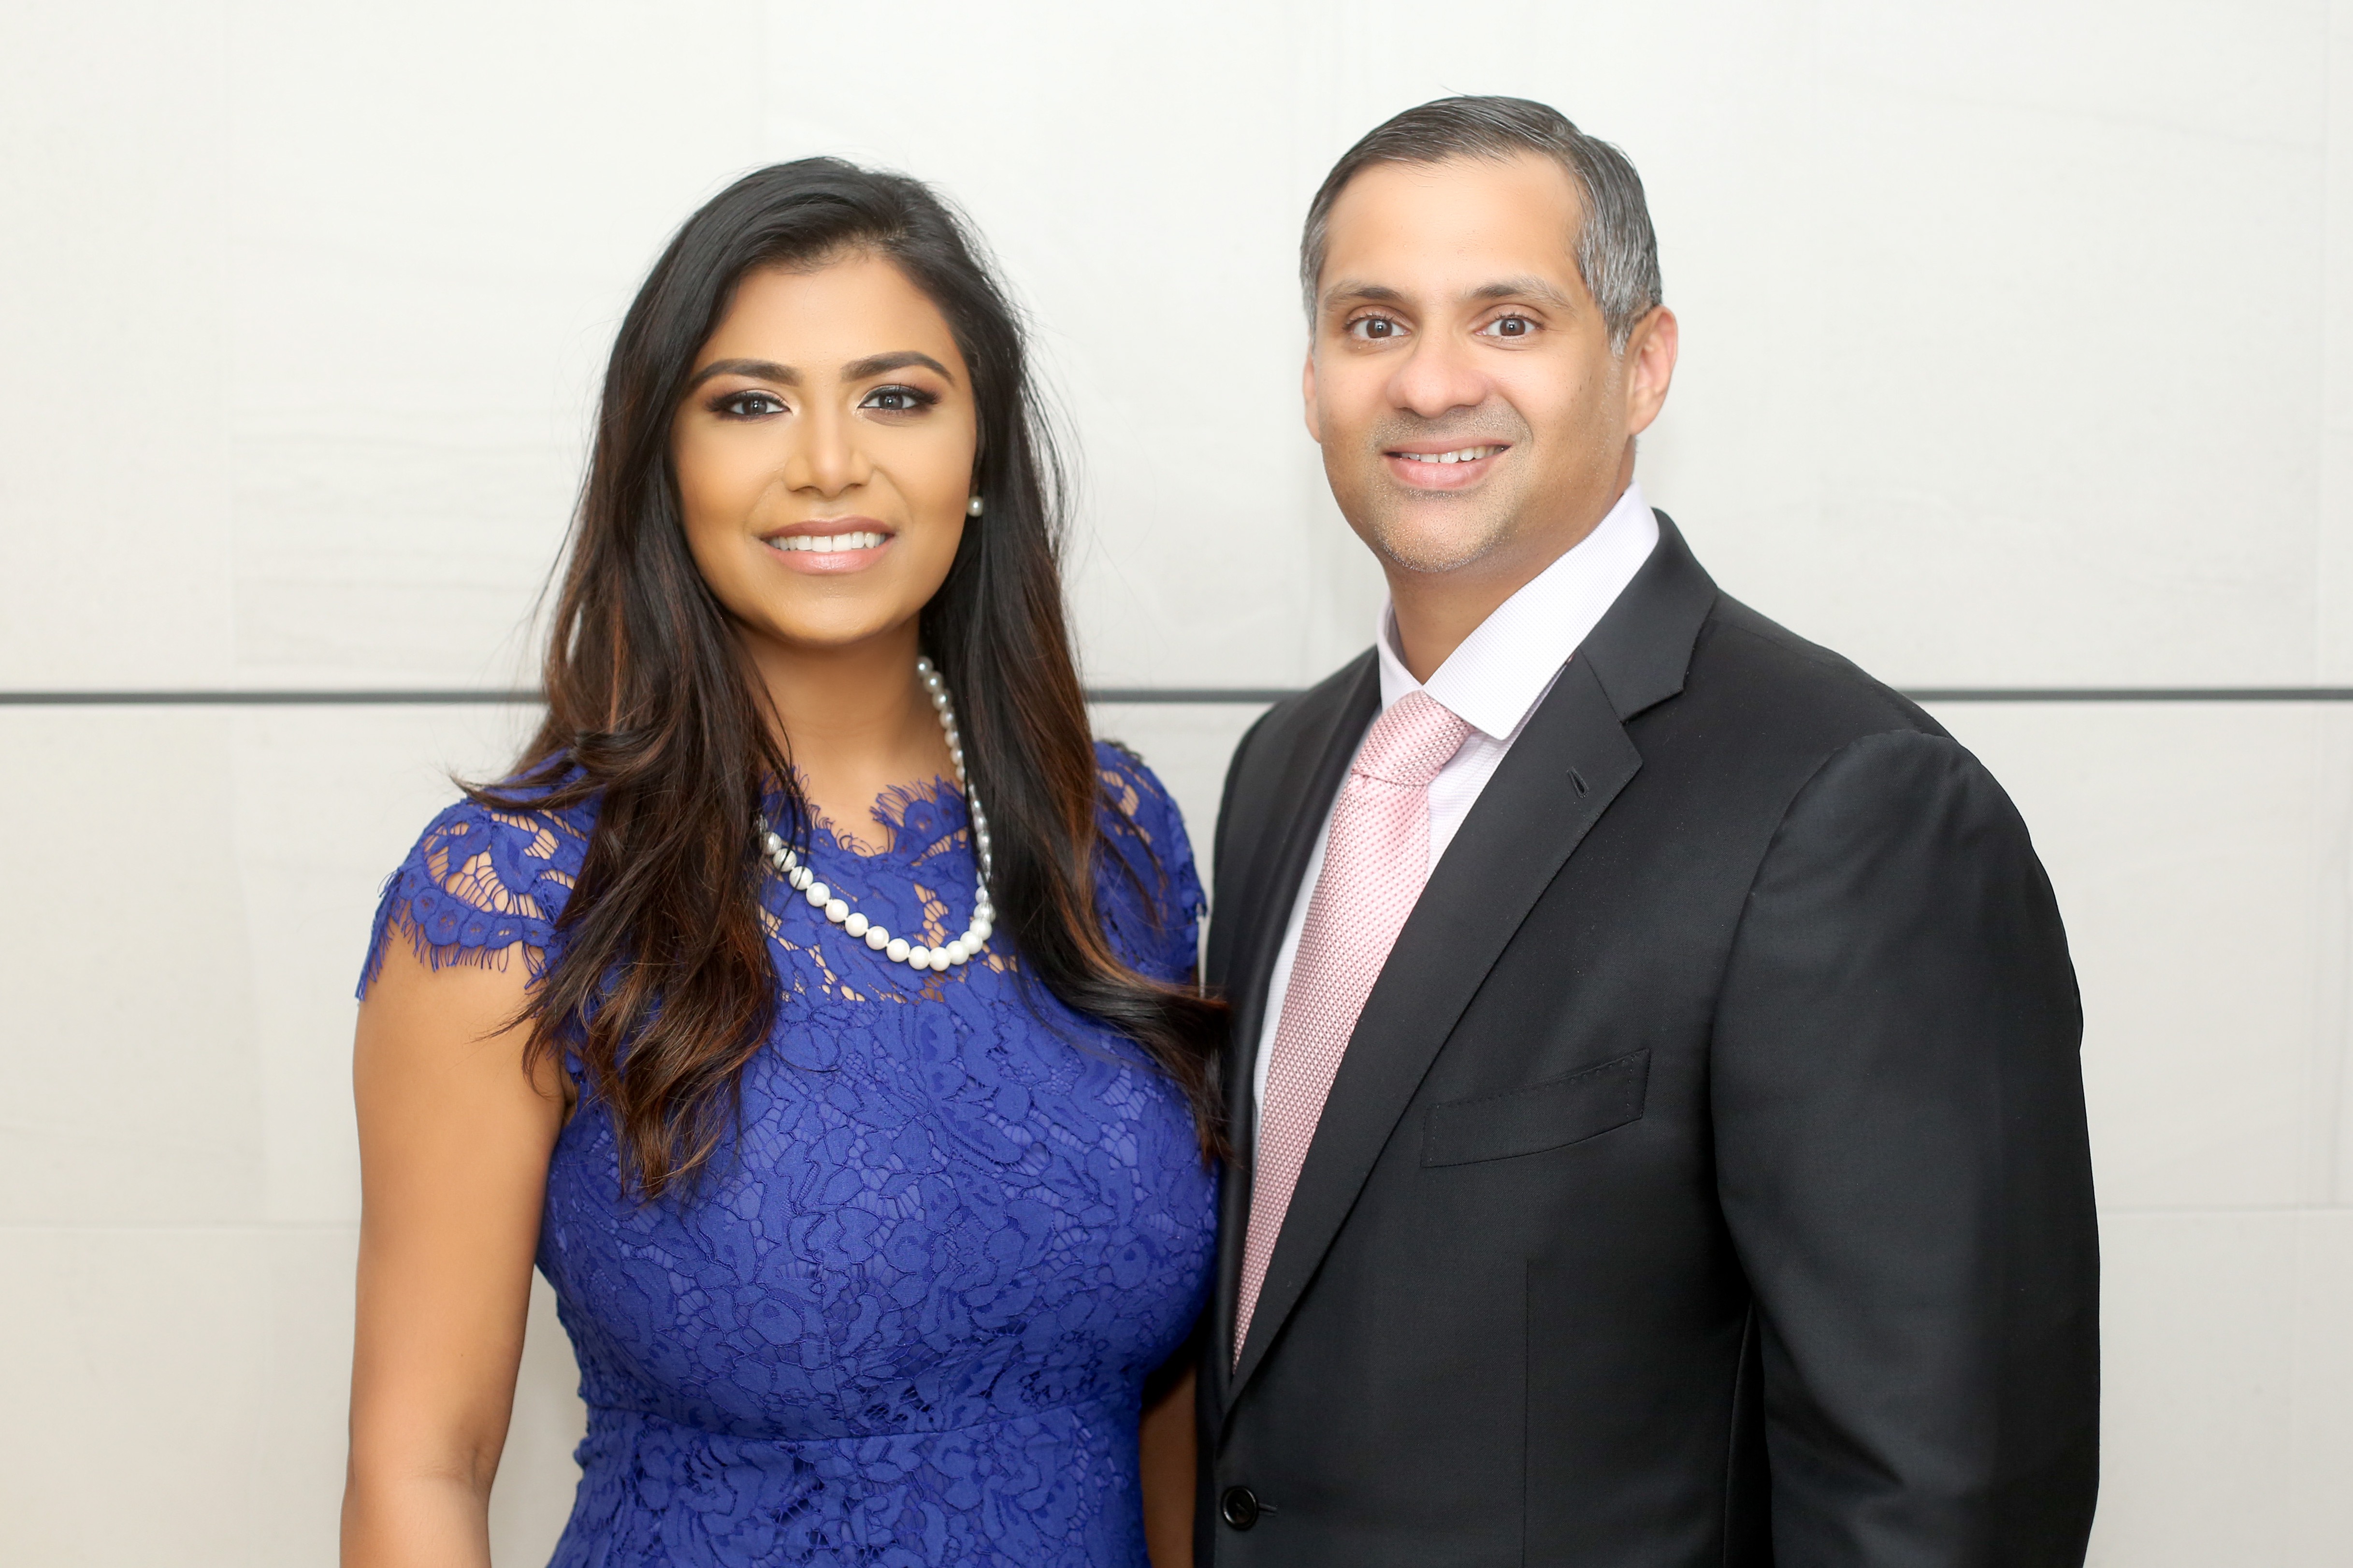 Why Choose Dr. Ravi For a SMART Tummy Tuck?